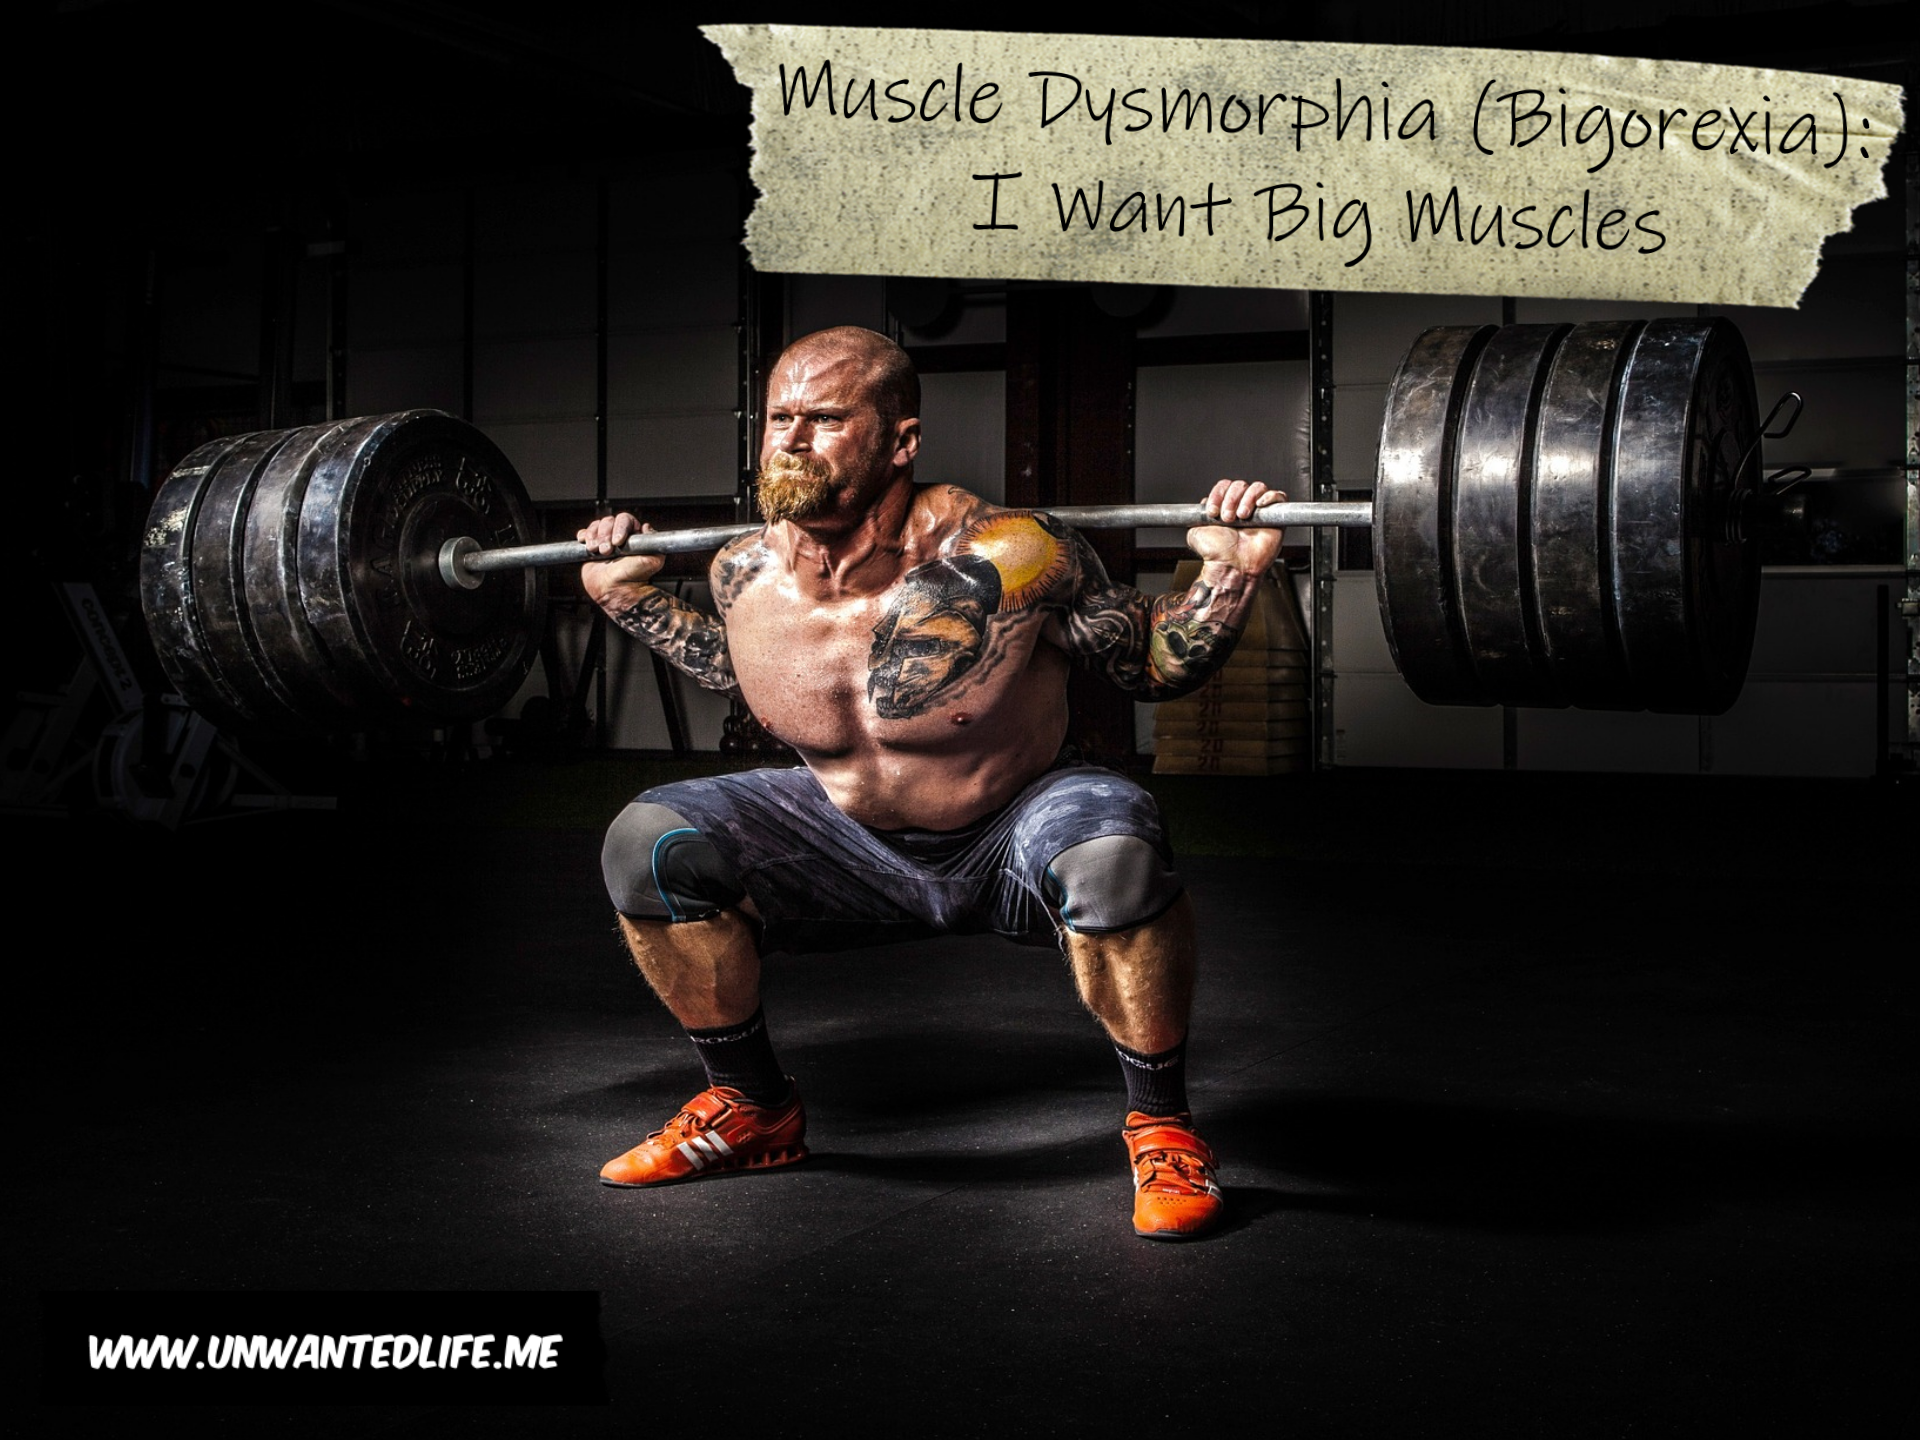 A photo of a white male weight lifter doing a barbell squat to represent the topic at the article - Muscle Dysmorphia (Bigorexia) I Want Big Muscles